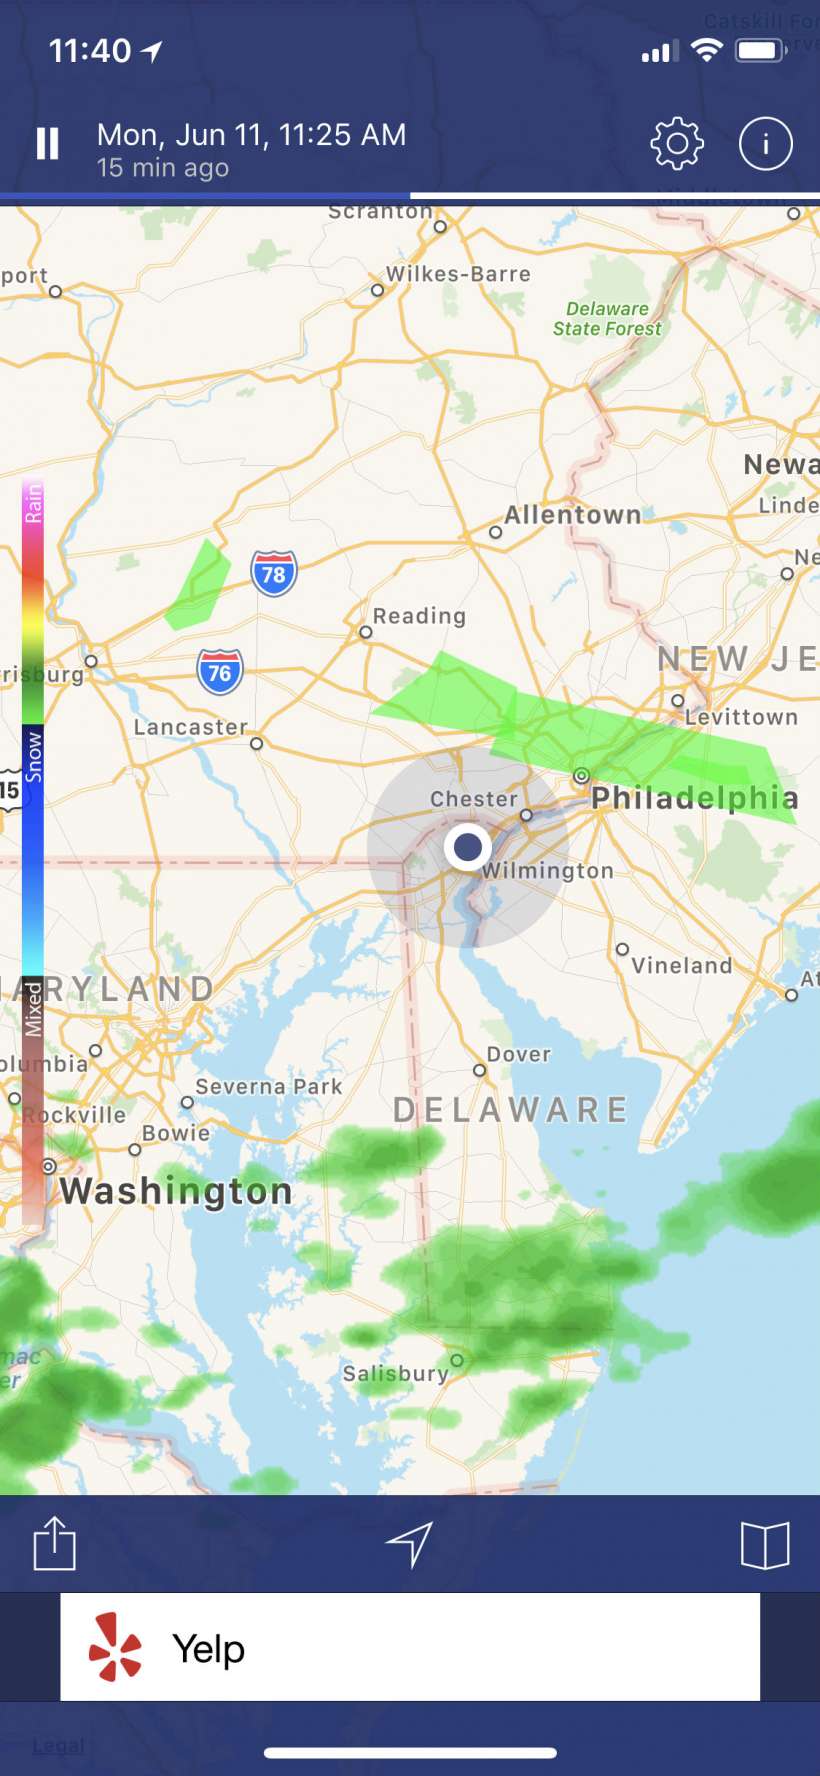 4 best free weather radar apps for iPhone.